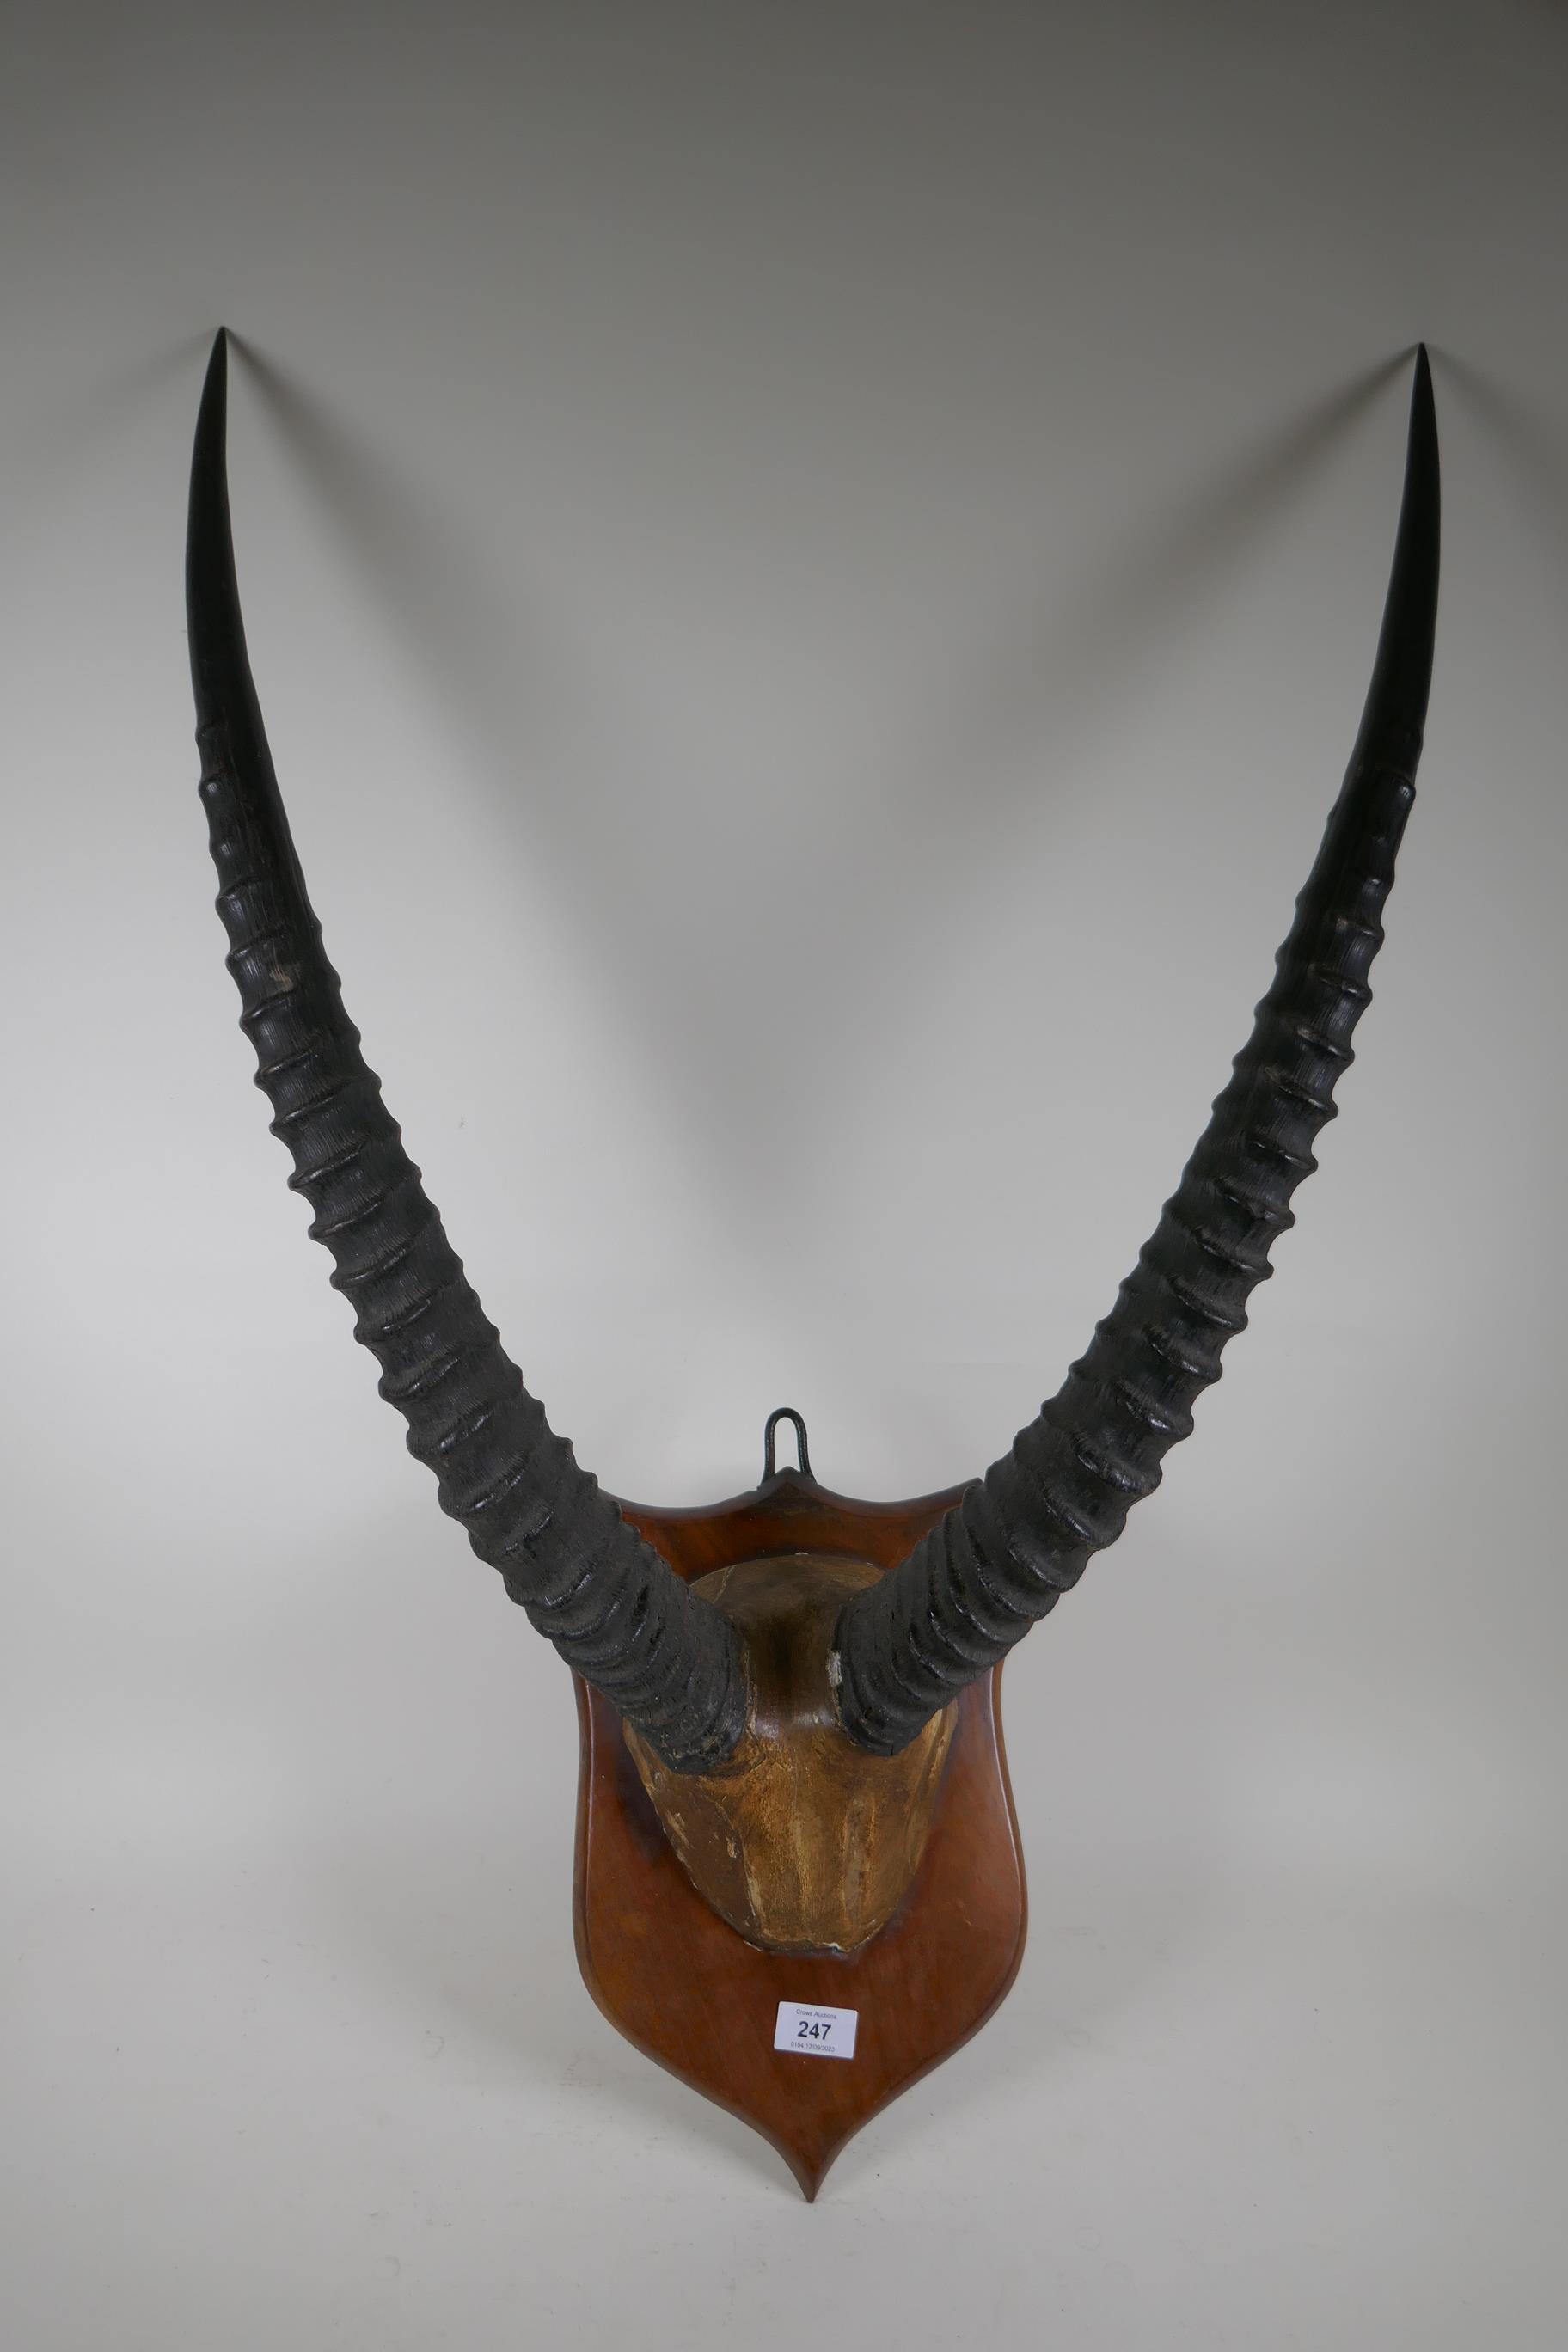 Antique pair of horns mounted on a shield shaped plaque, 90cm high